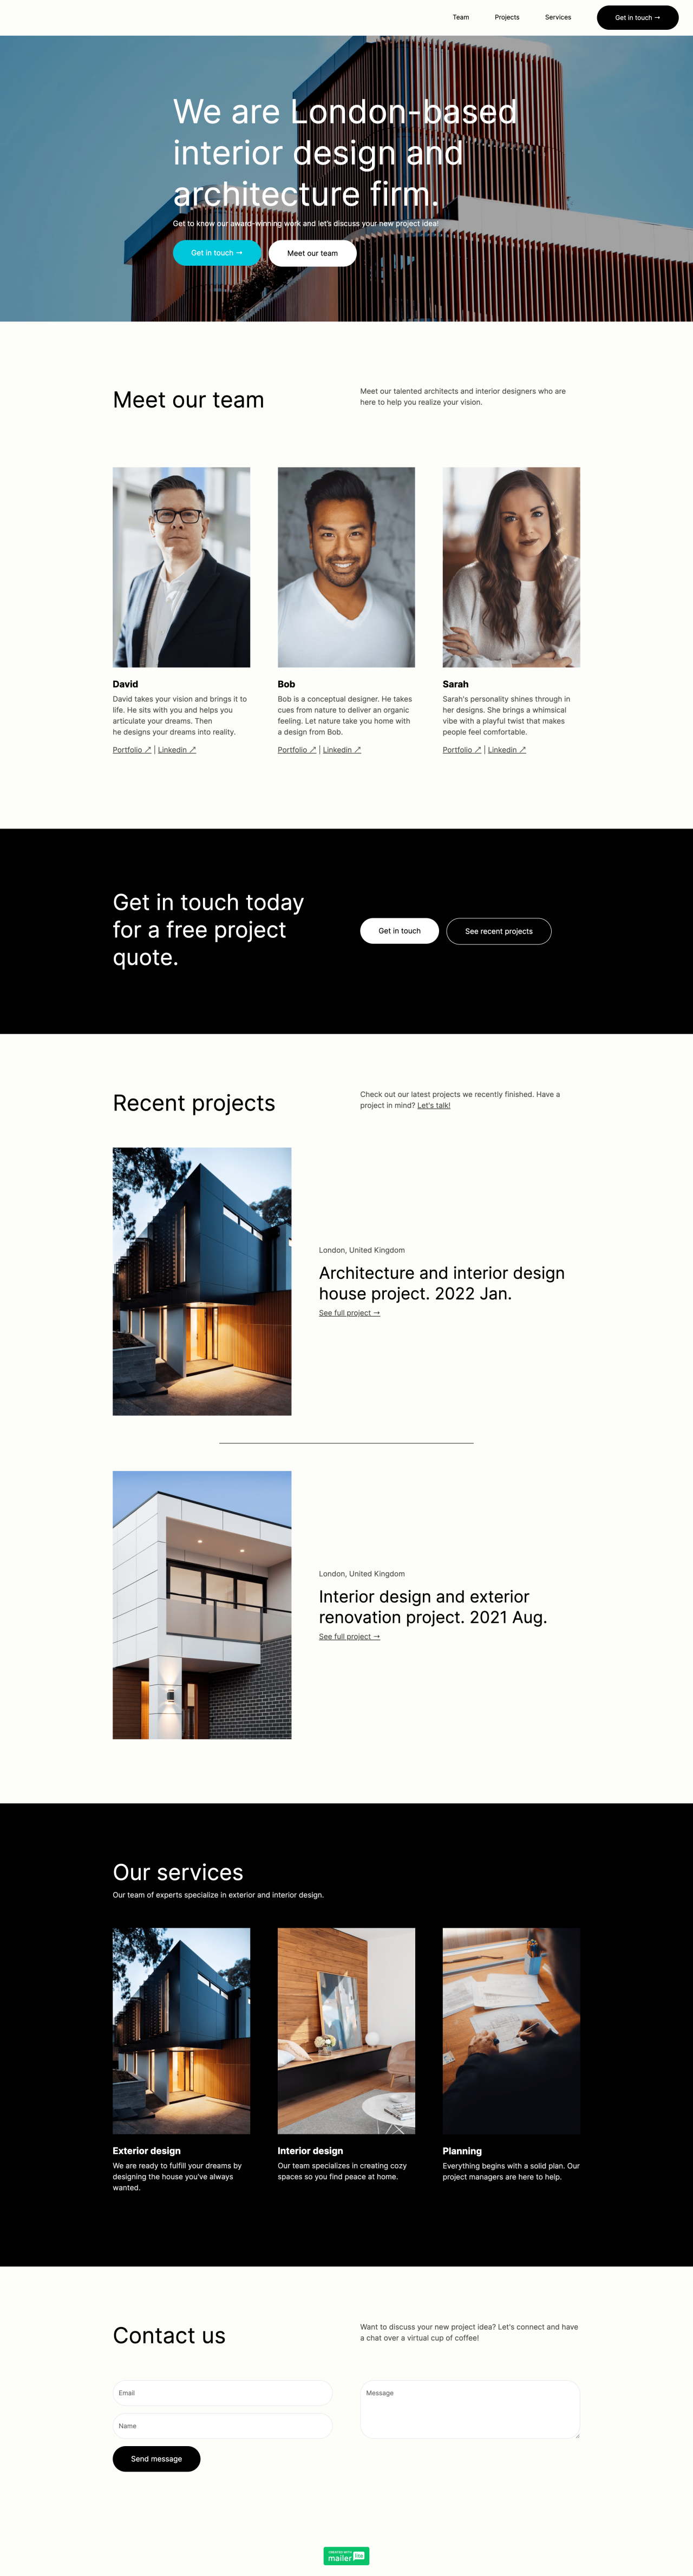 Architecture firm template - Made by MailerLite